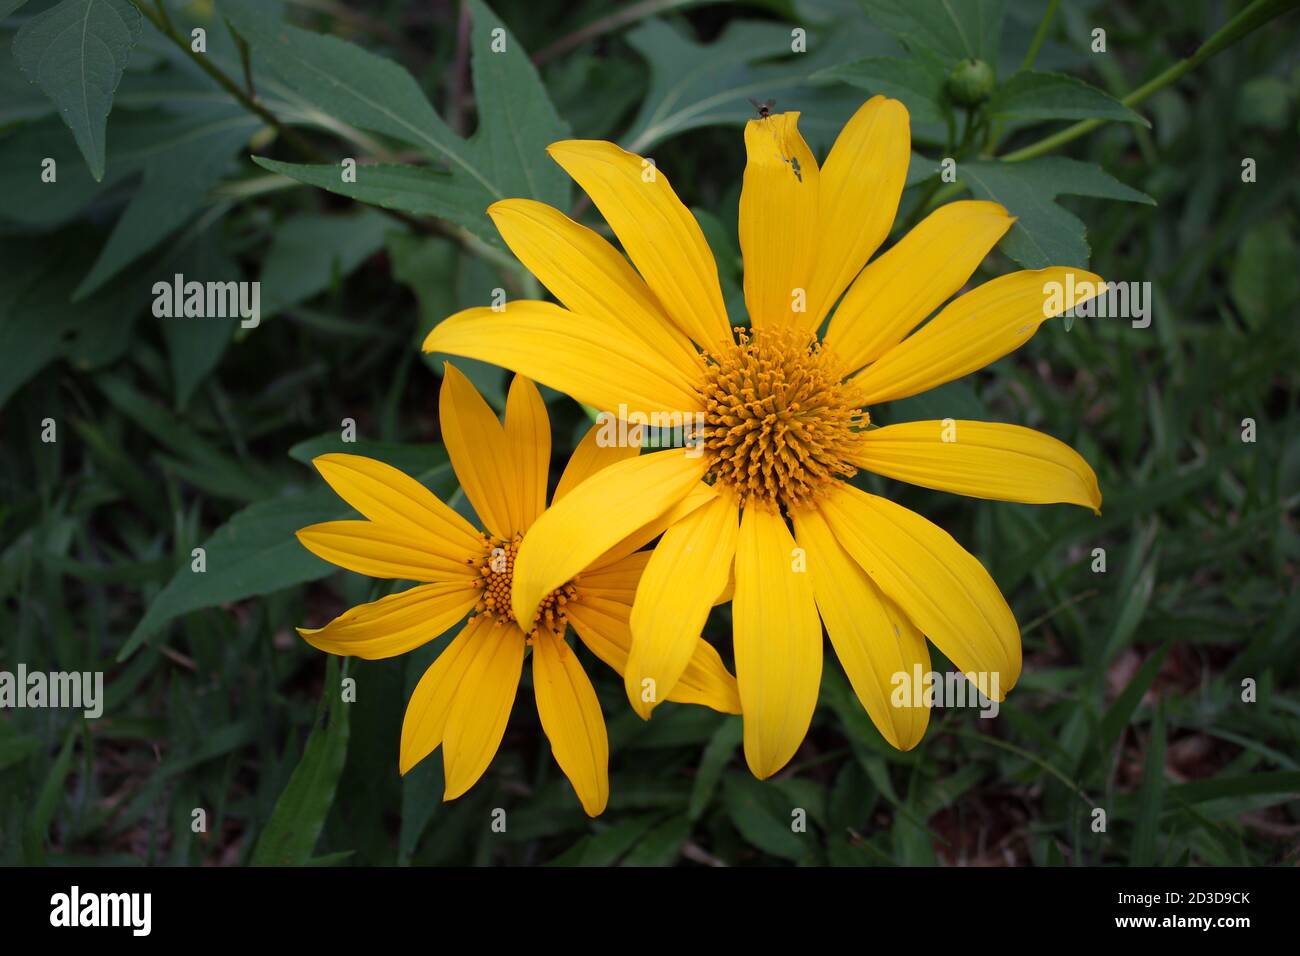 Yellow flowers stand out from the green leaves, and a small mosquito was on one of the petals of the larger flower. Stock Photo